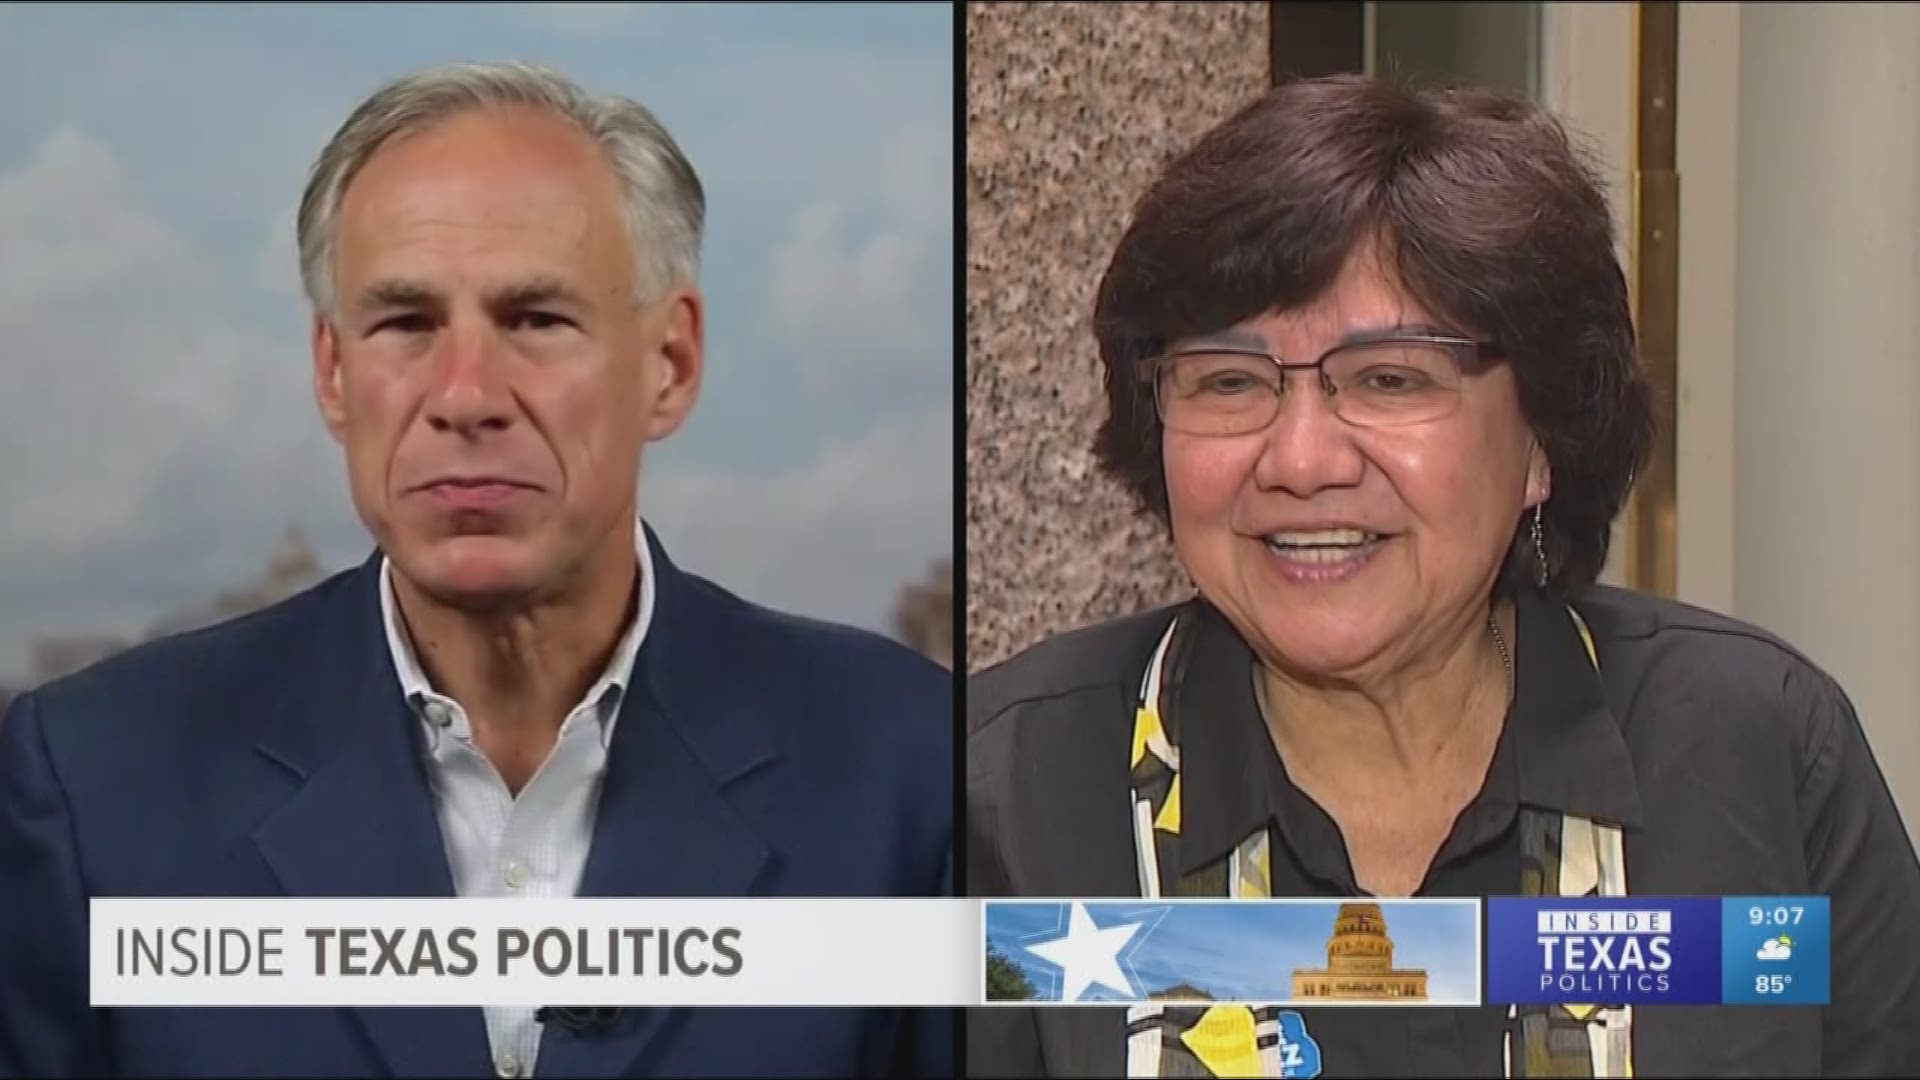 Texas Governor Greg Abbott has agreed to debate his Democratic challenger Lupe Valdez. The debate will happen on a Friday night at the end of September, about the time many high school football games kick-off. Aman Batheja, in for Ross Ramsey, is the poli